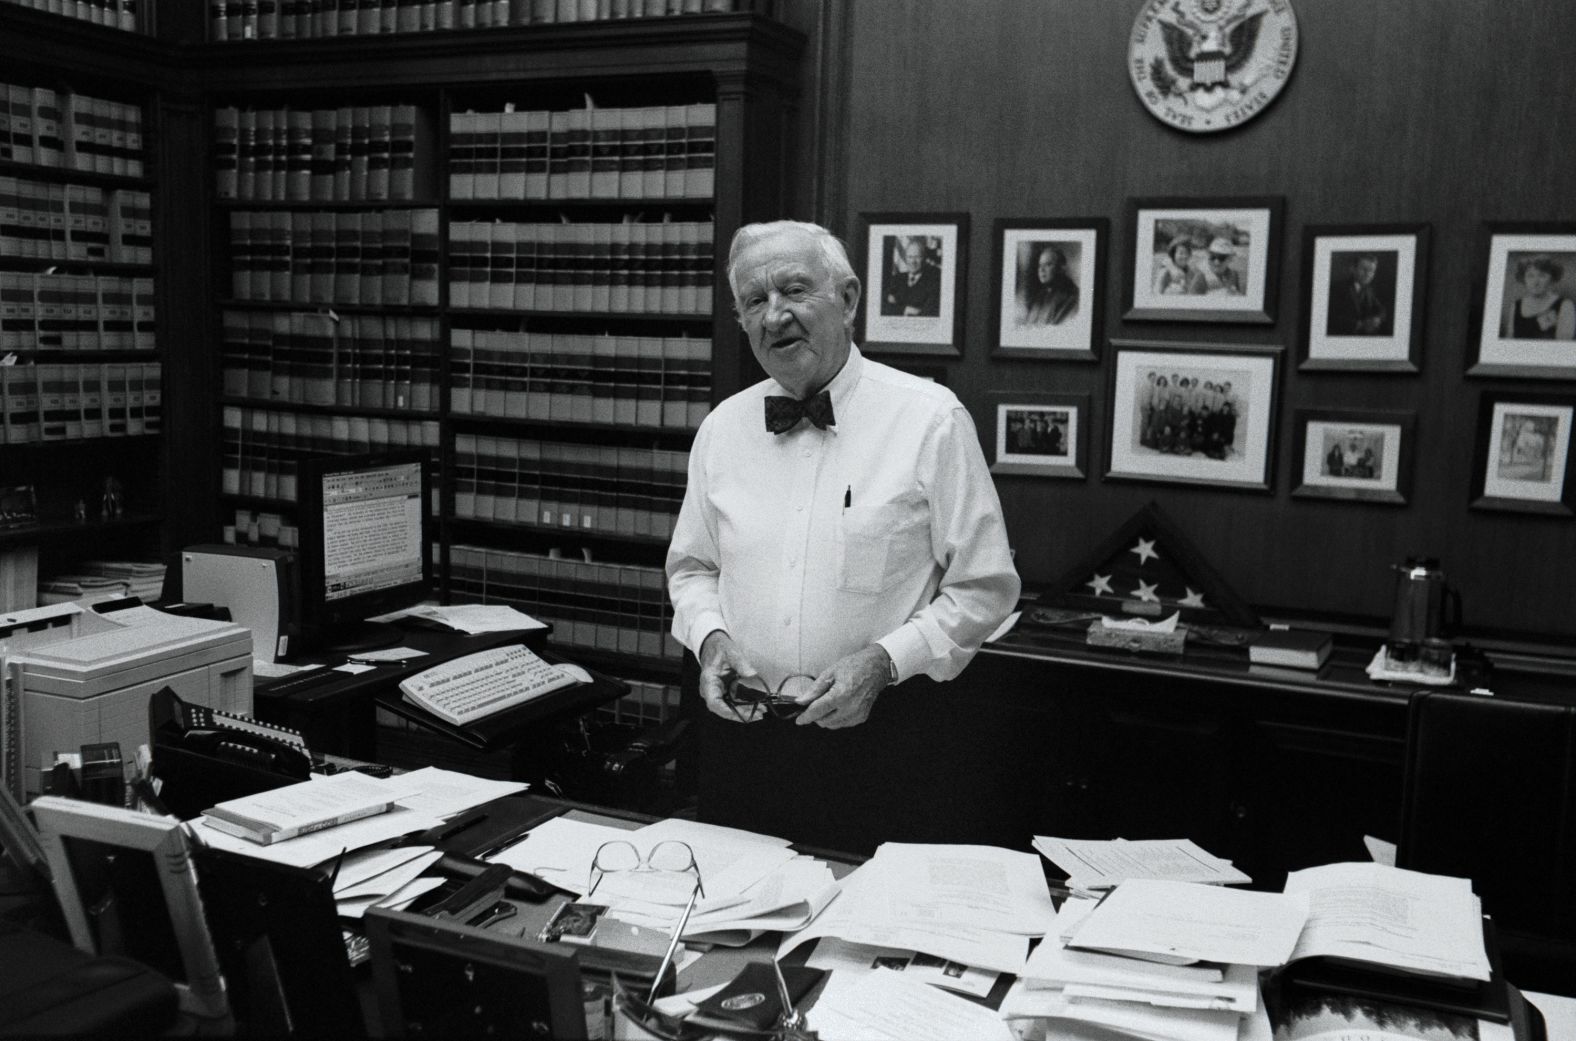 Stevens poses for a portrait in his chambers at the Supreme Court on June 17, 2002.